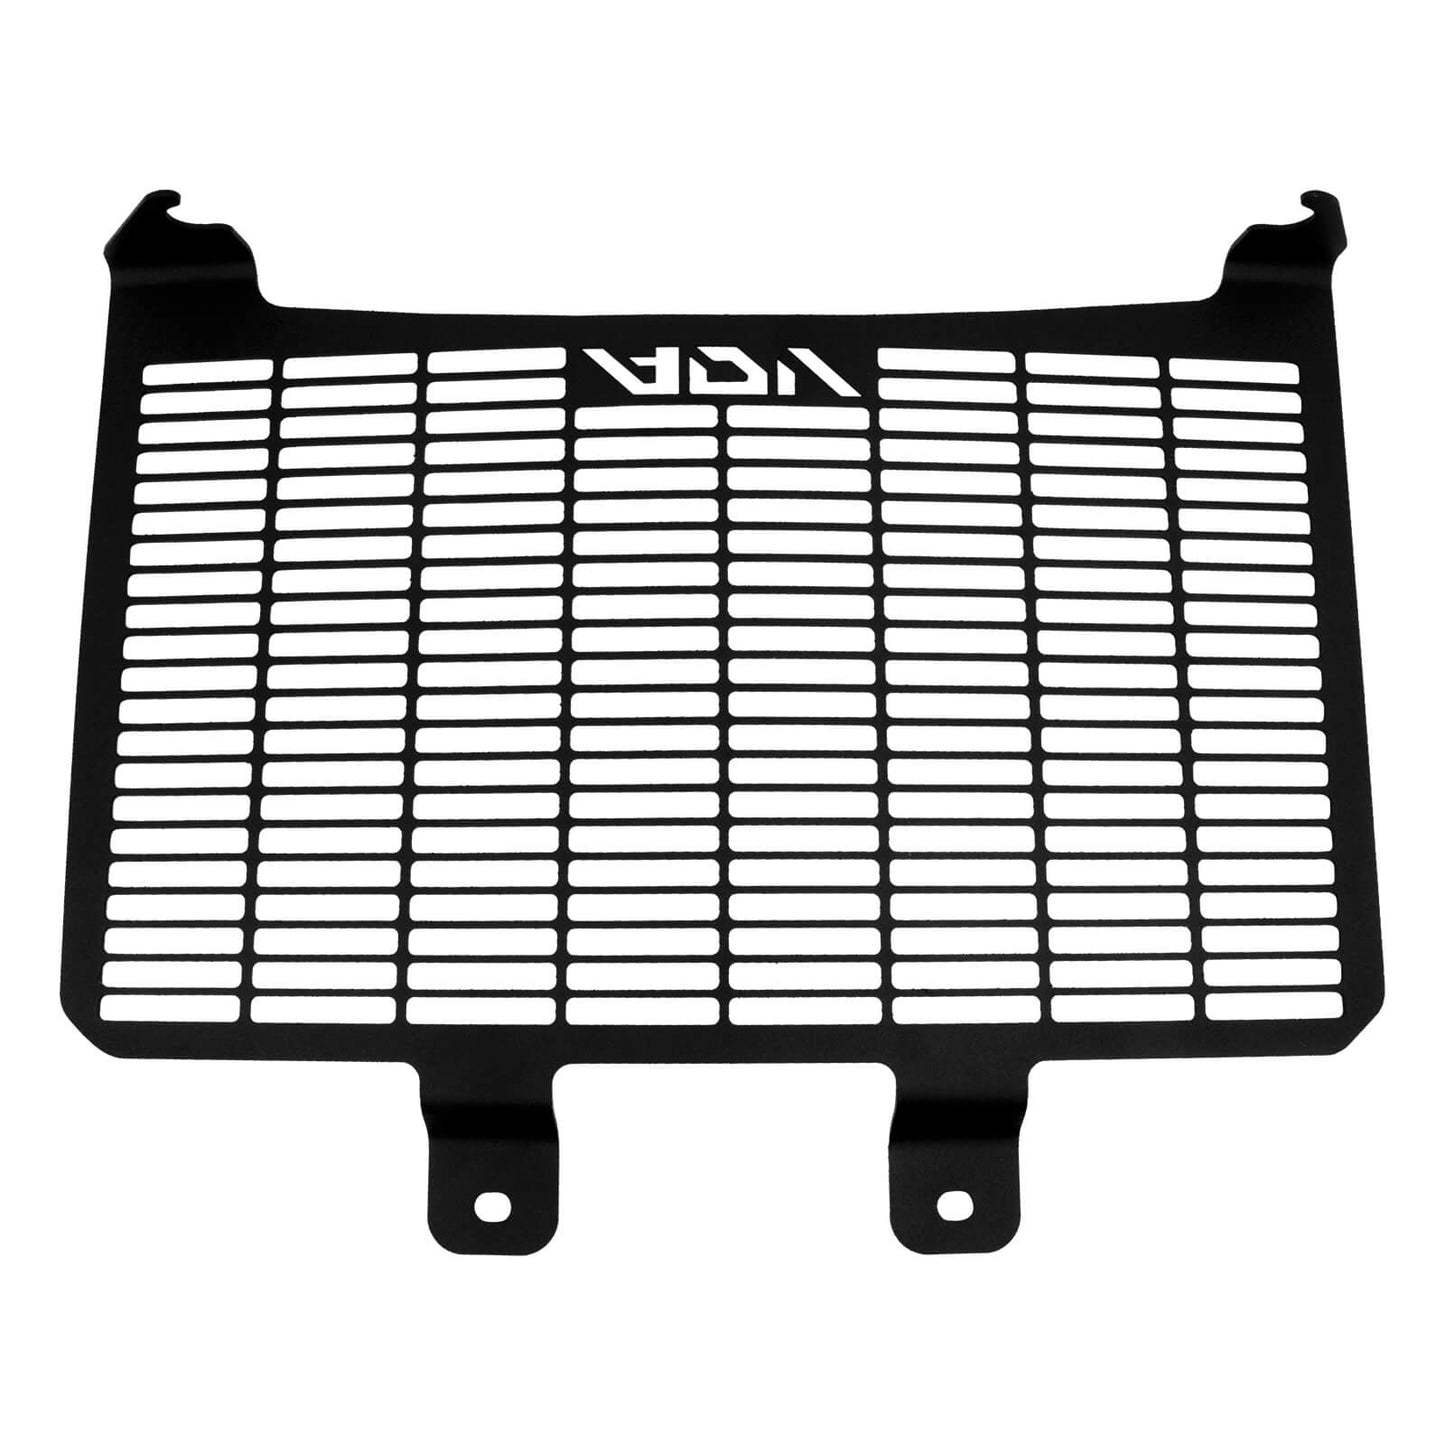 TH029301-mactions-shield-radiator-guard-grille-cover-for-harley